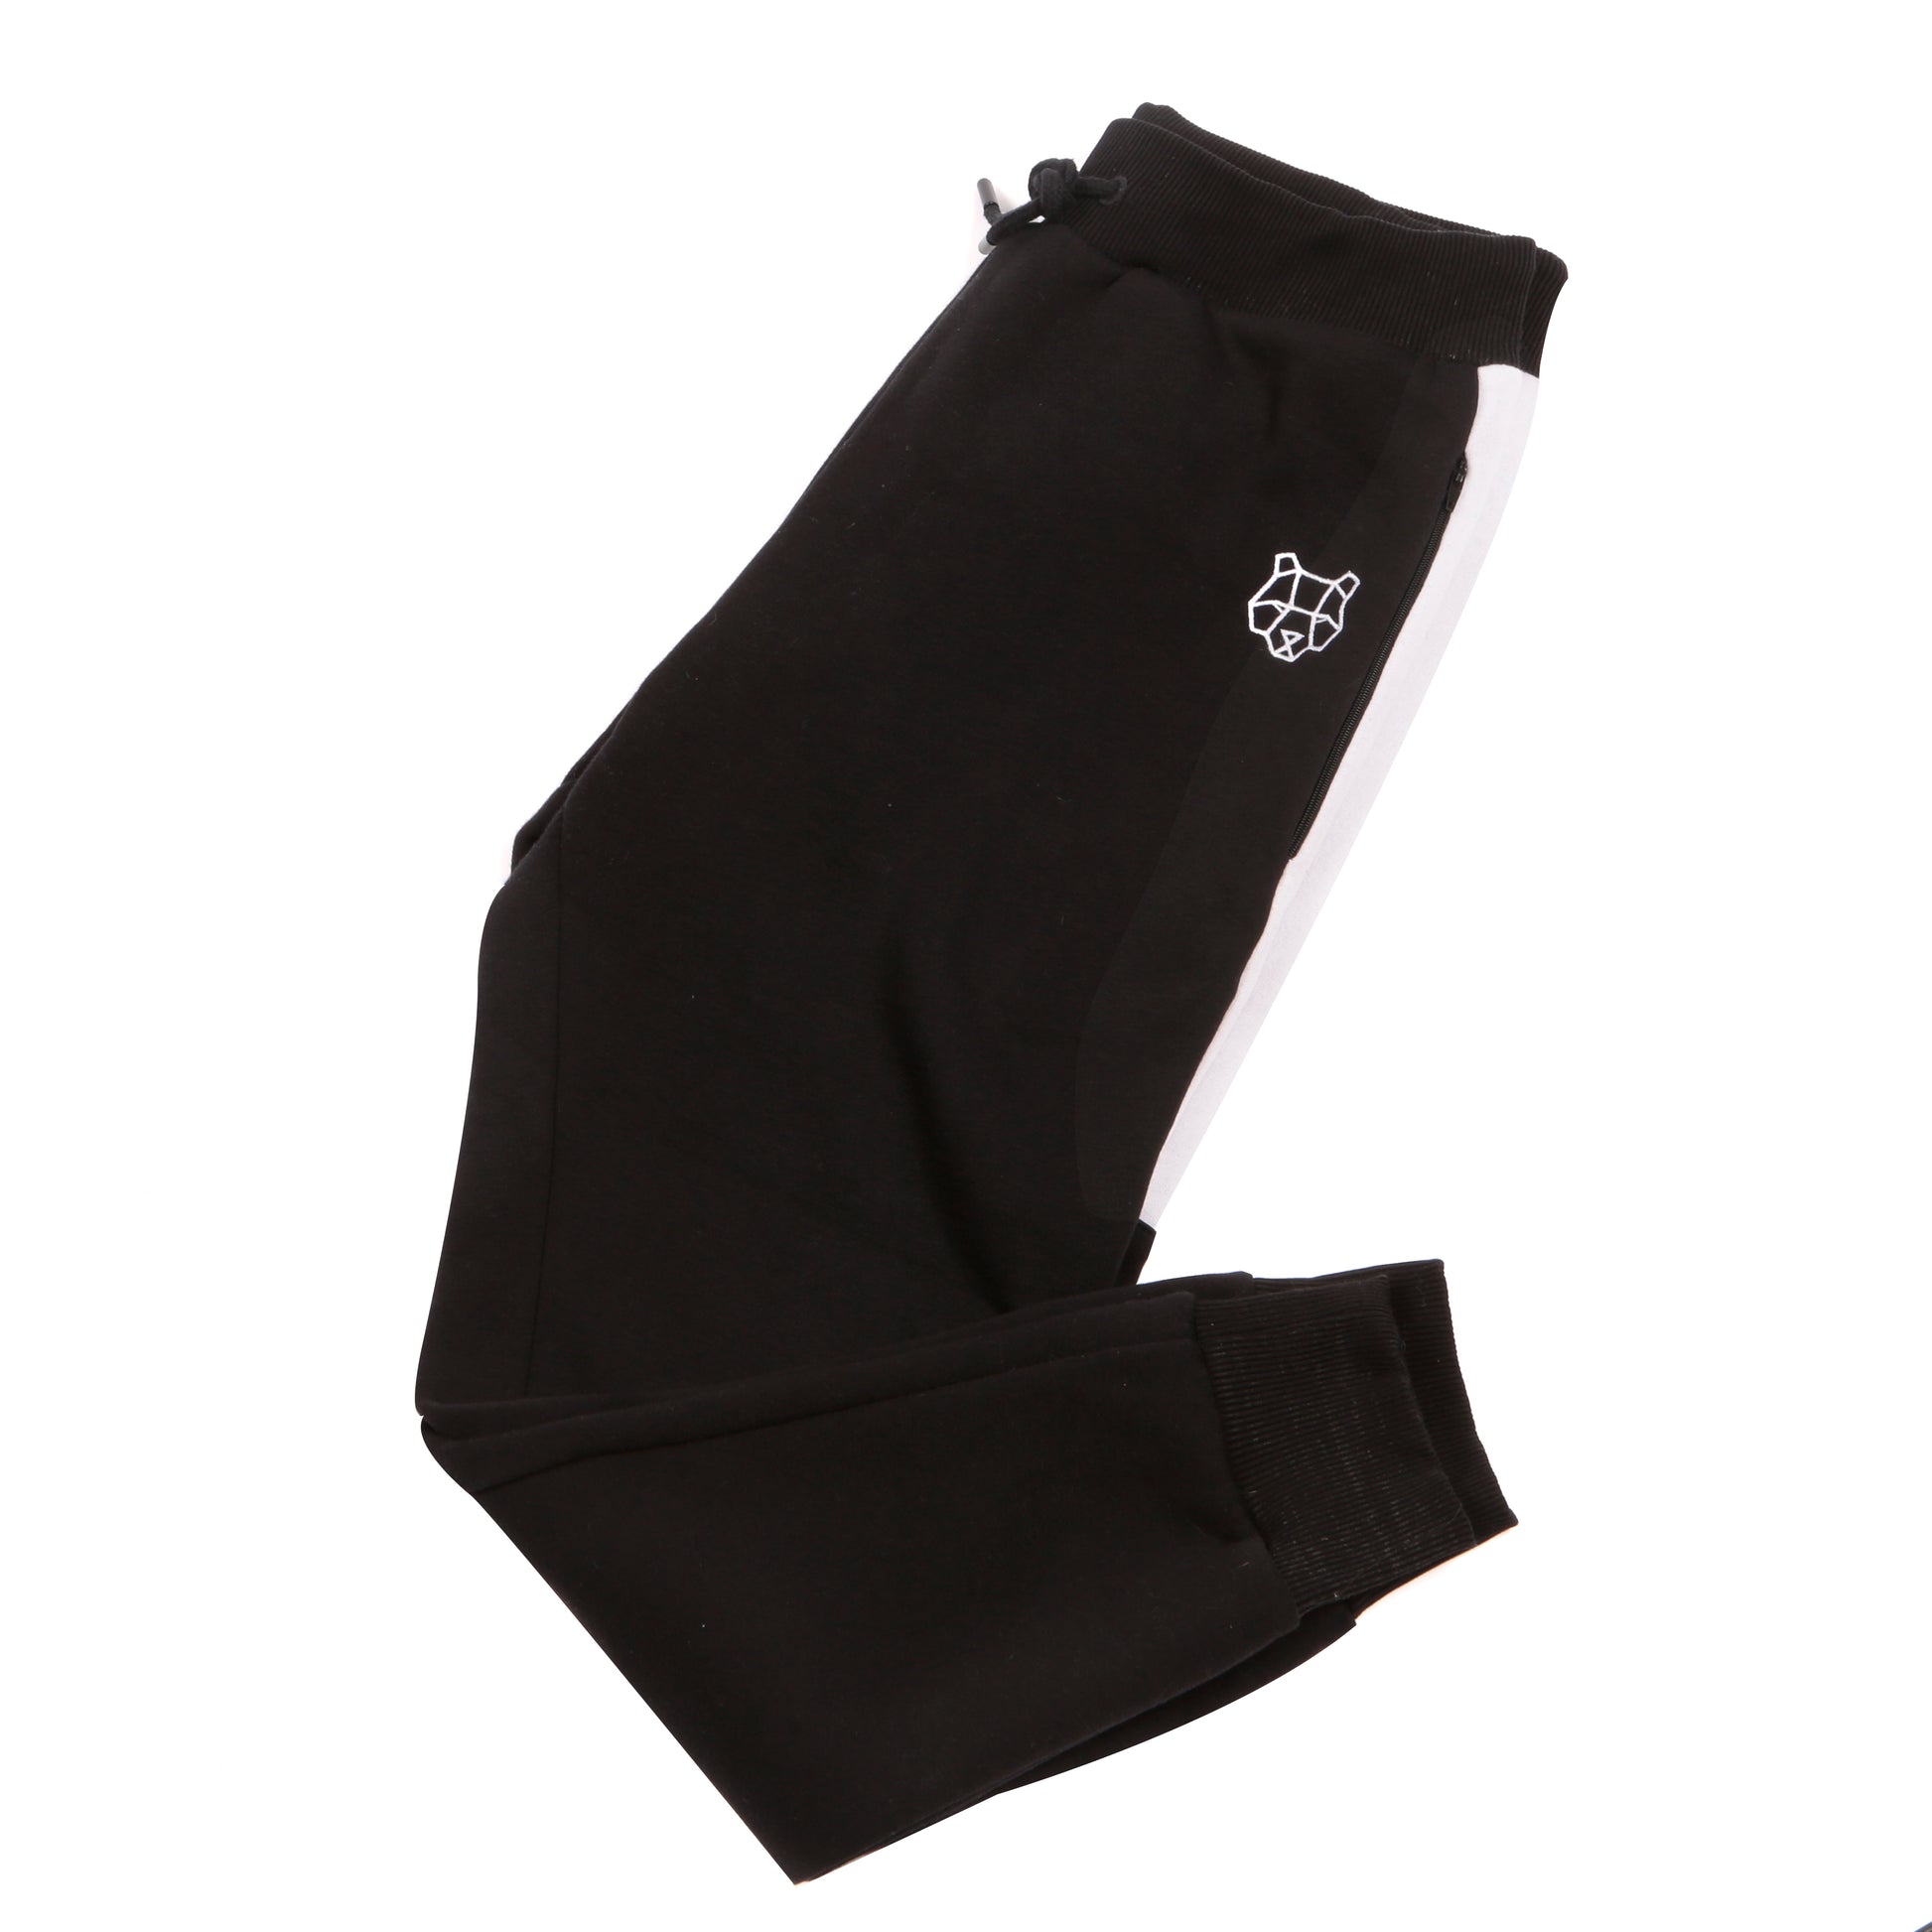 Childrens Black Fitted Tracksuit Bottoms with White Stripe